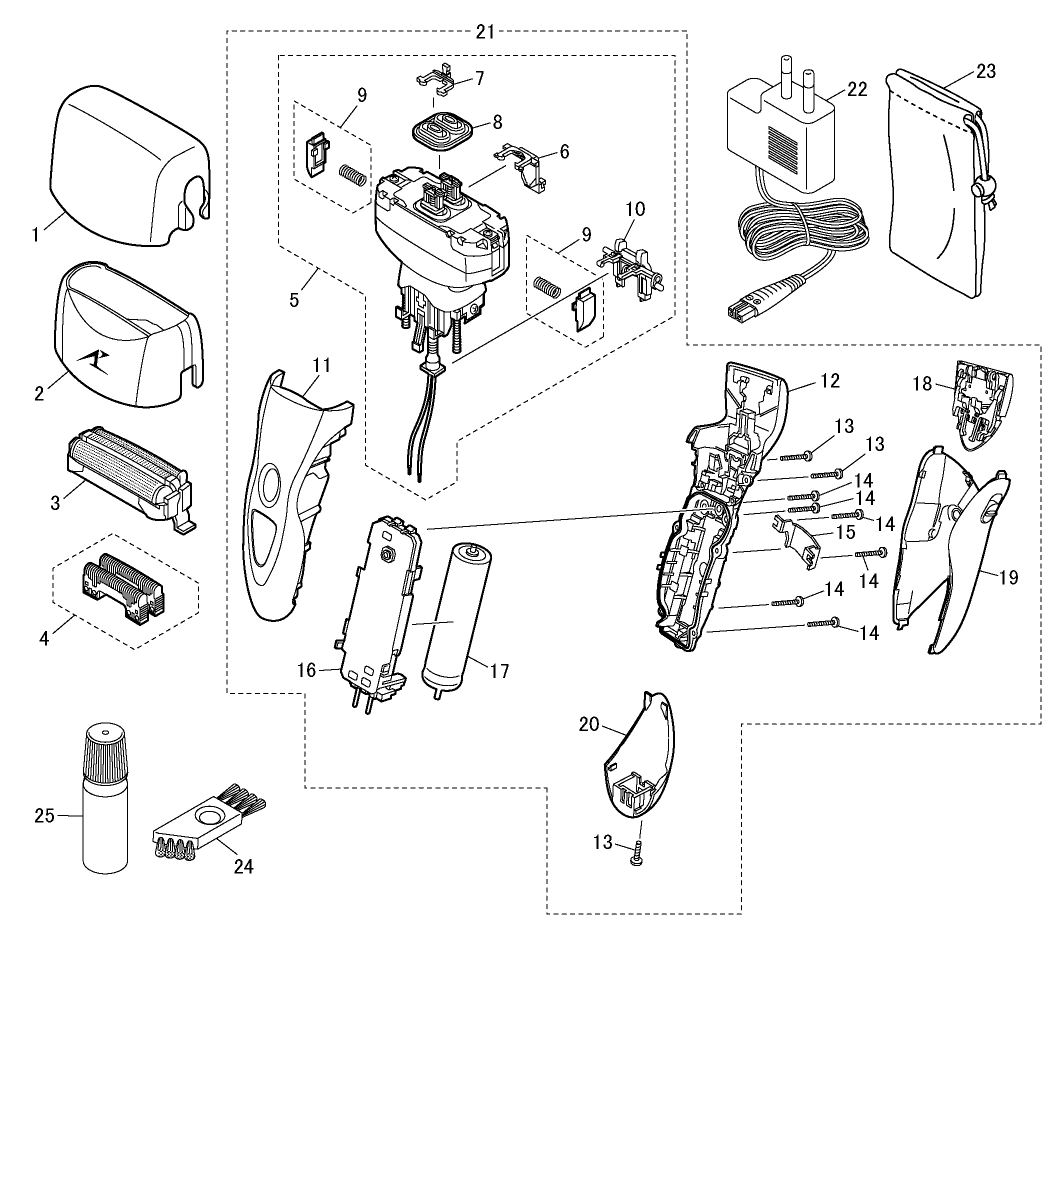 ES-8109: Exploded View